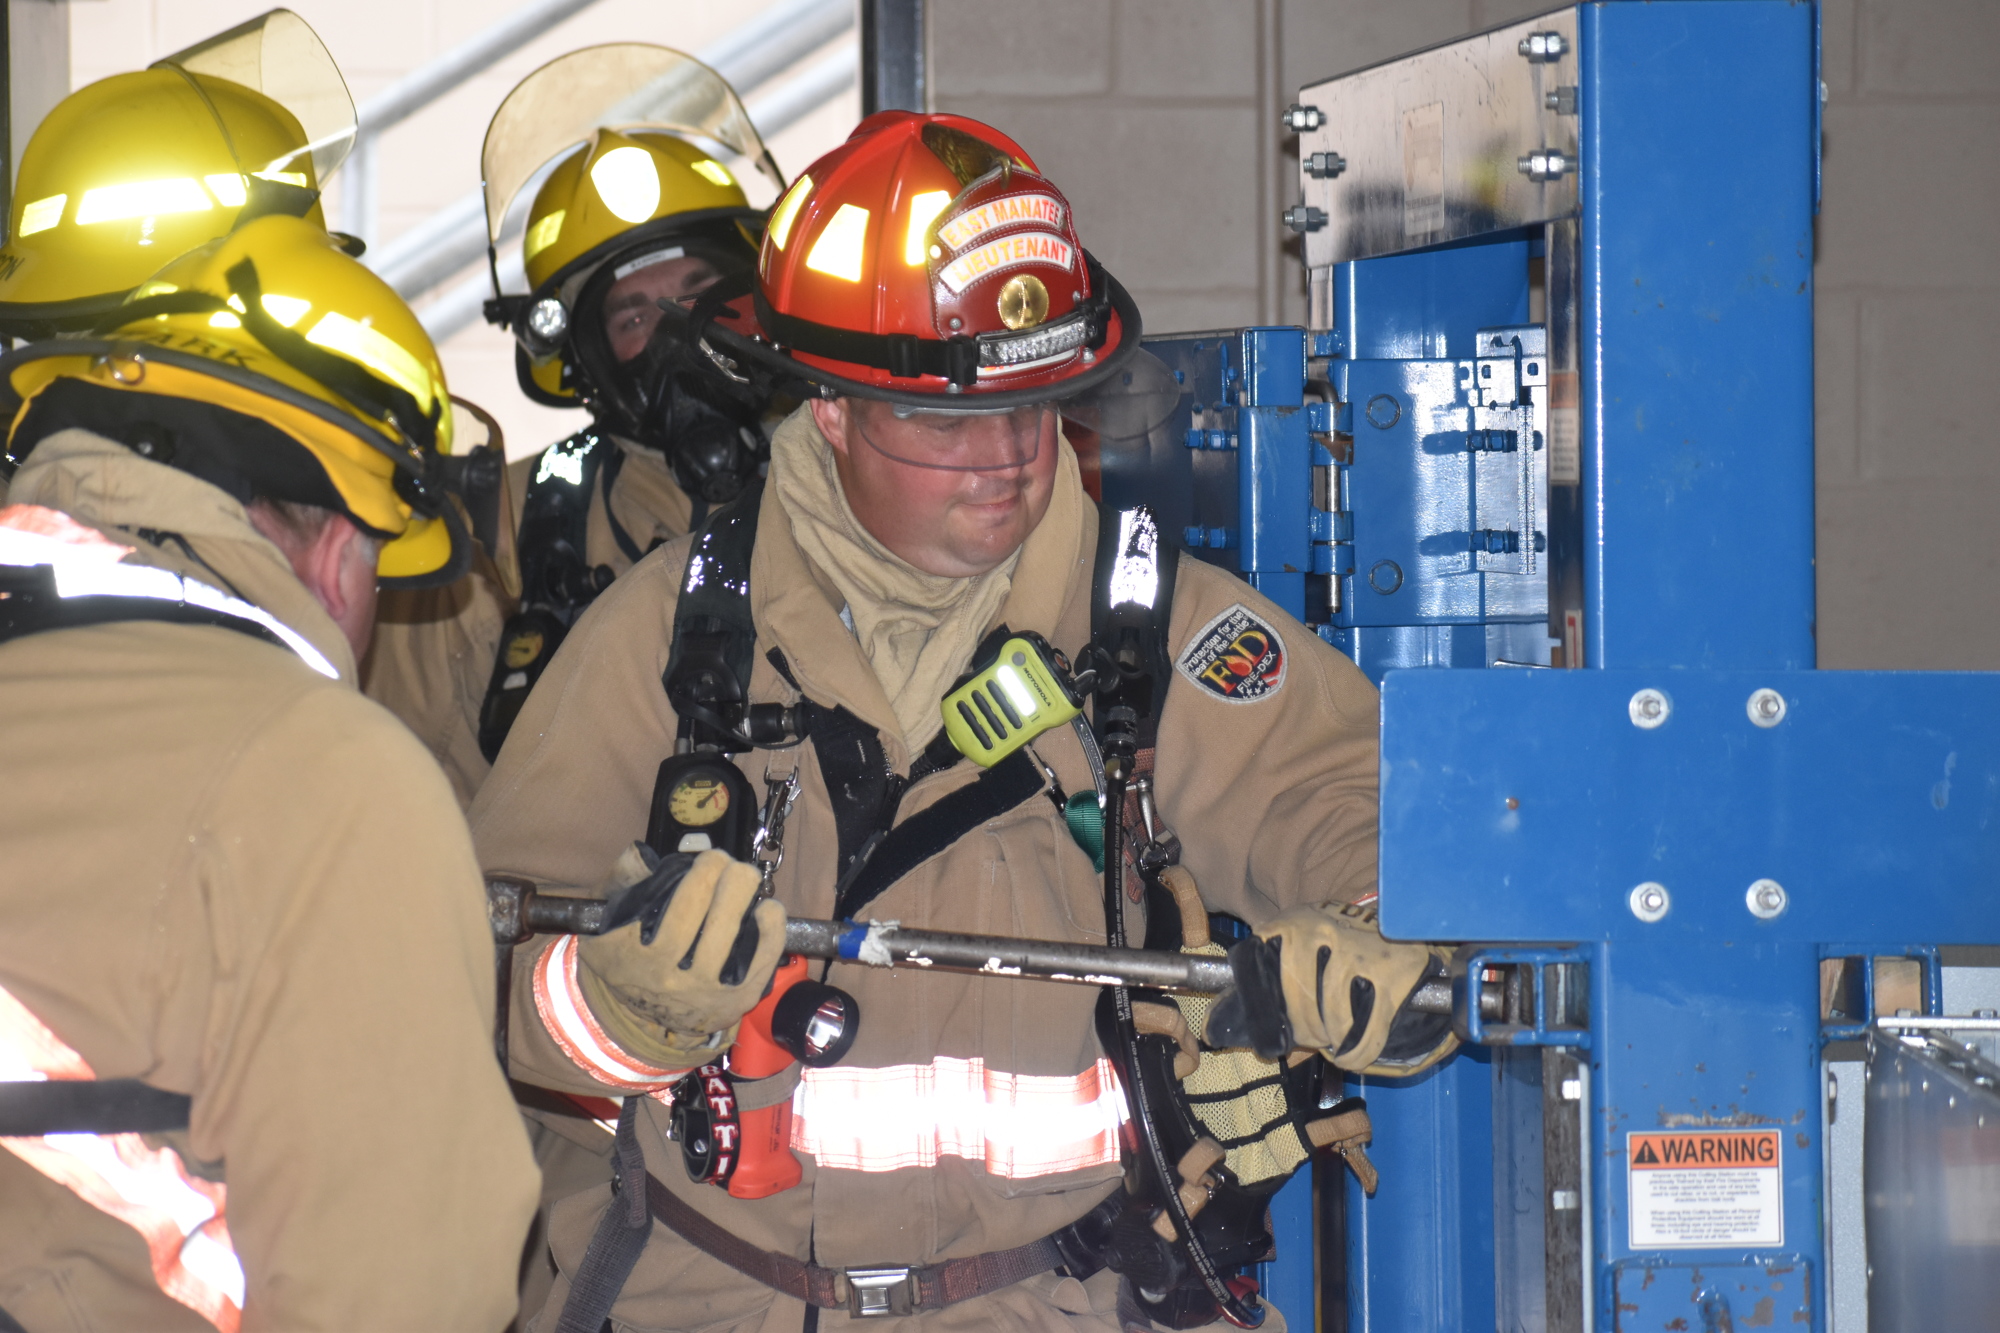 During a training exercise, Lt. Shawn Battick pounds his way through a bolted door.